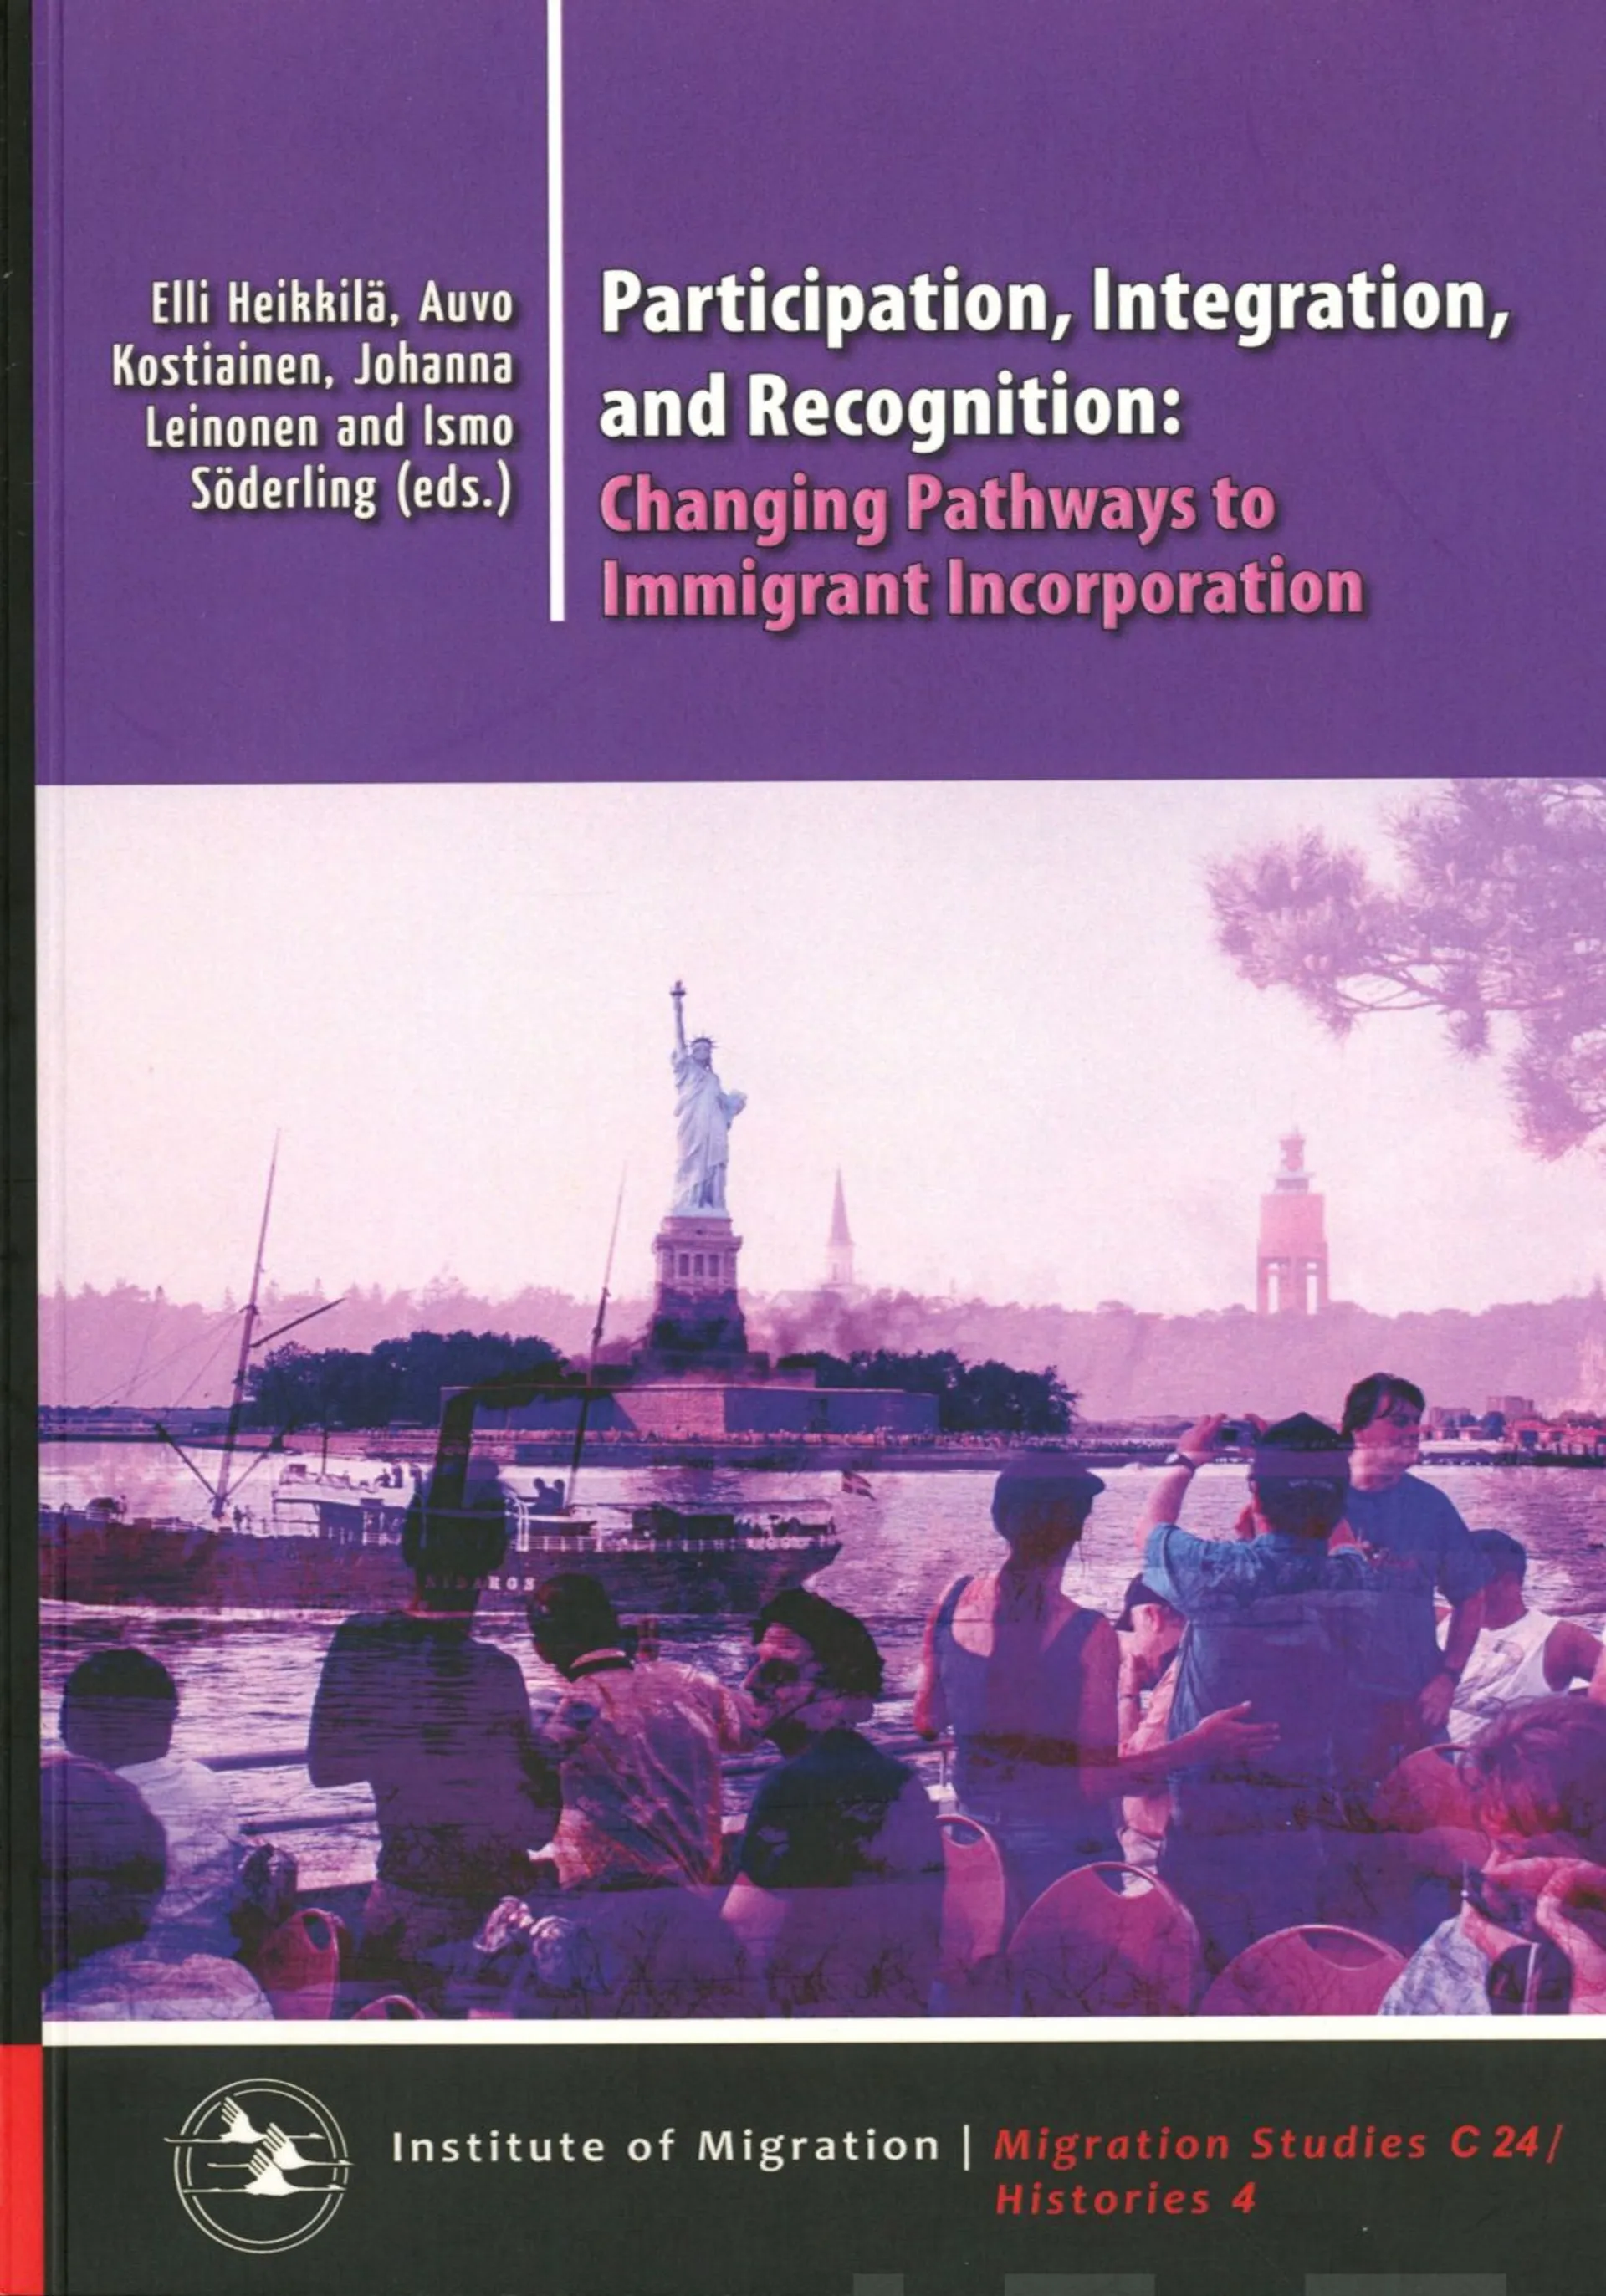 Participation, Integration, and Recognition